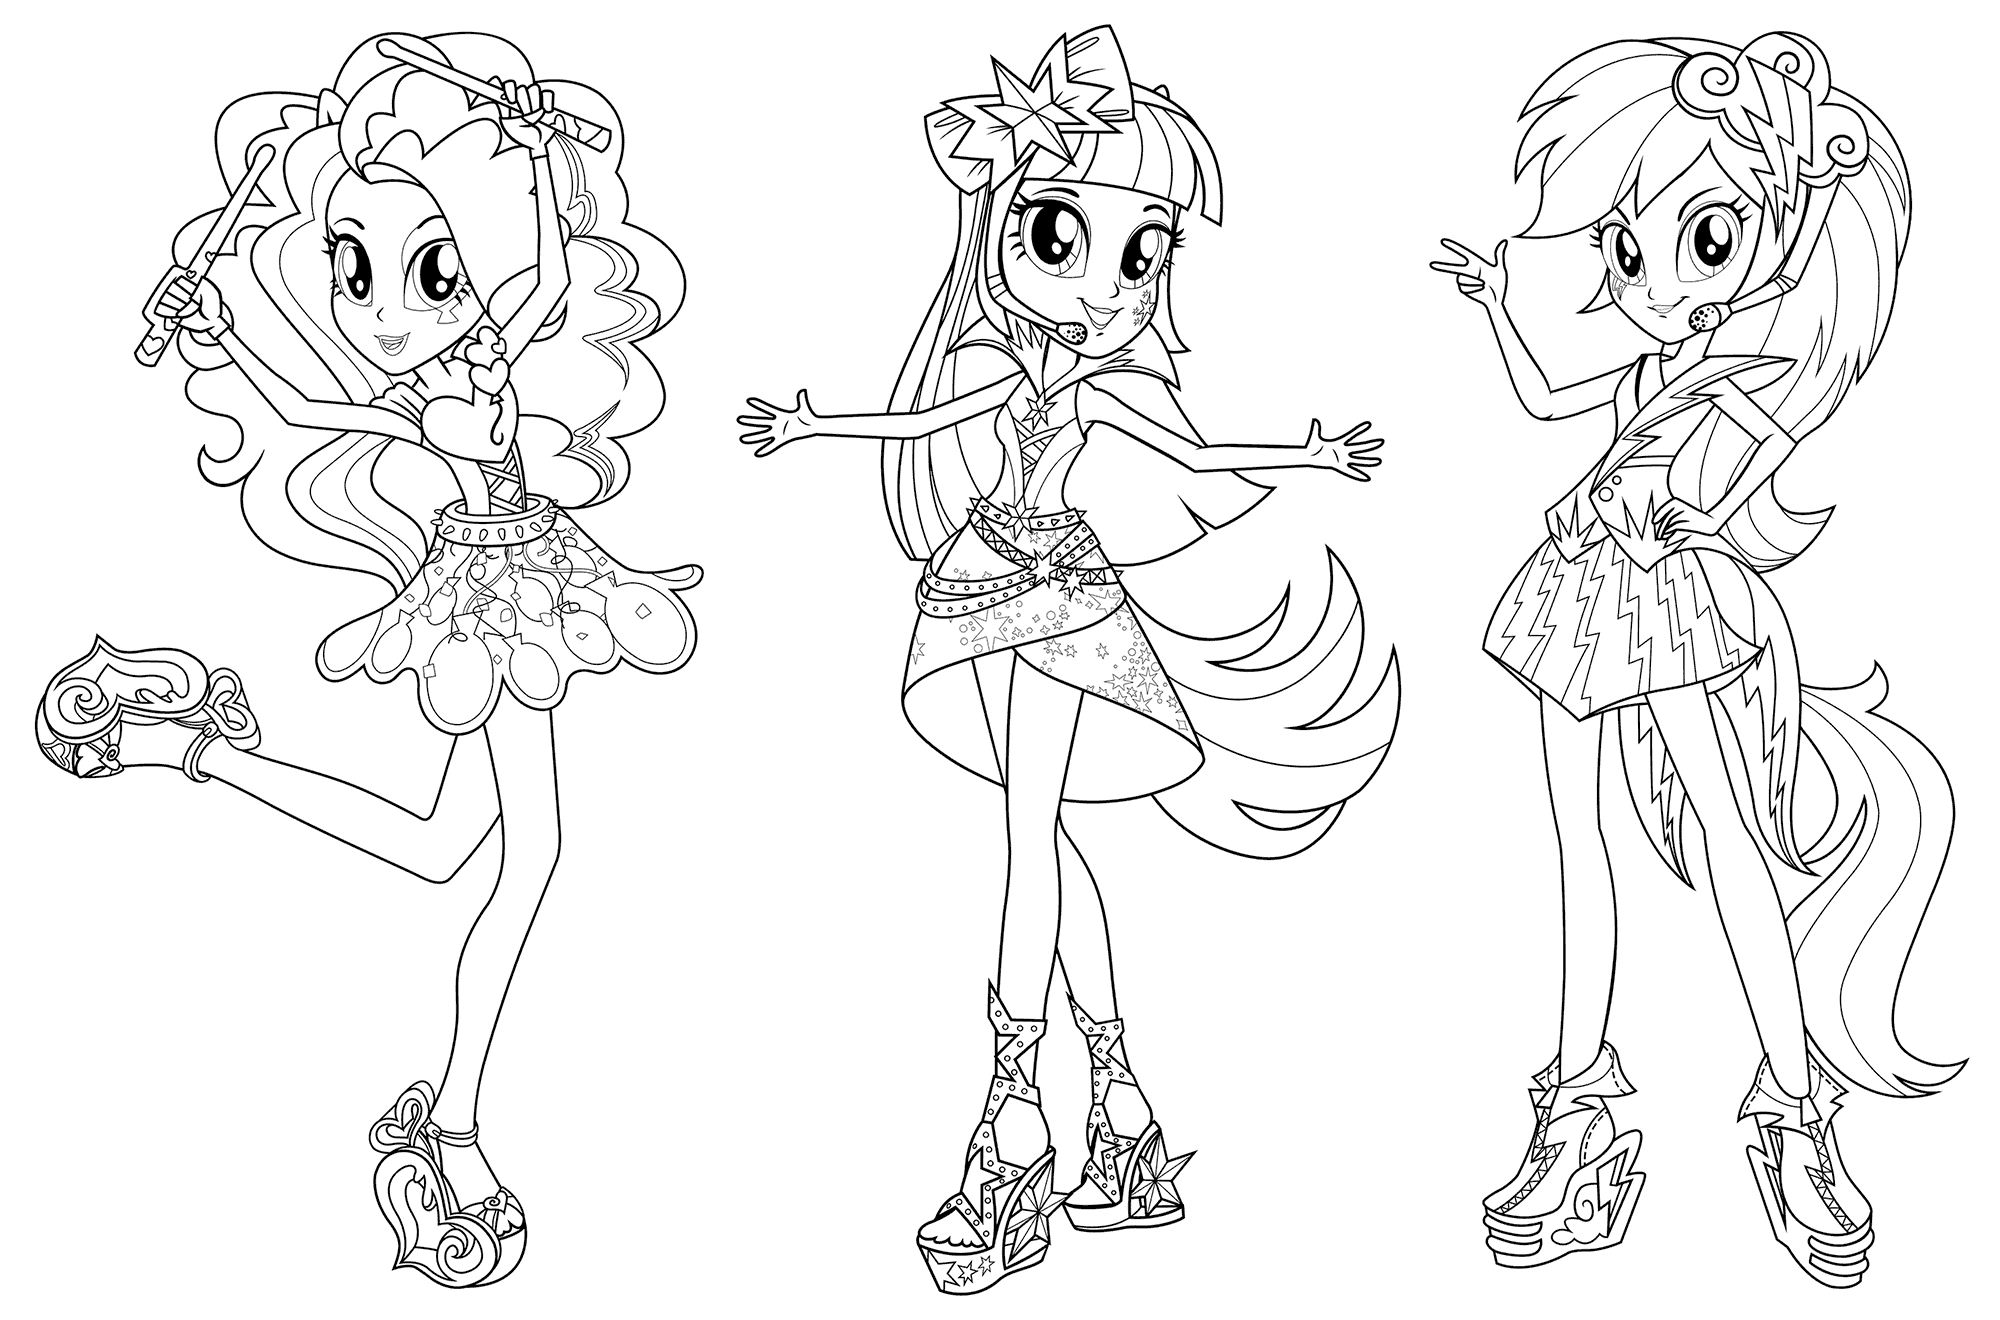 My Equestria Girl Rainbow Rocks Suri Polomare from My Little Pony Coloring Page